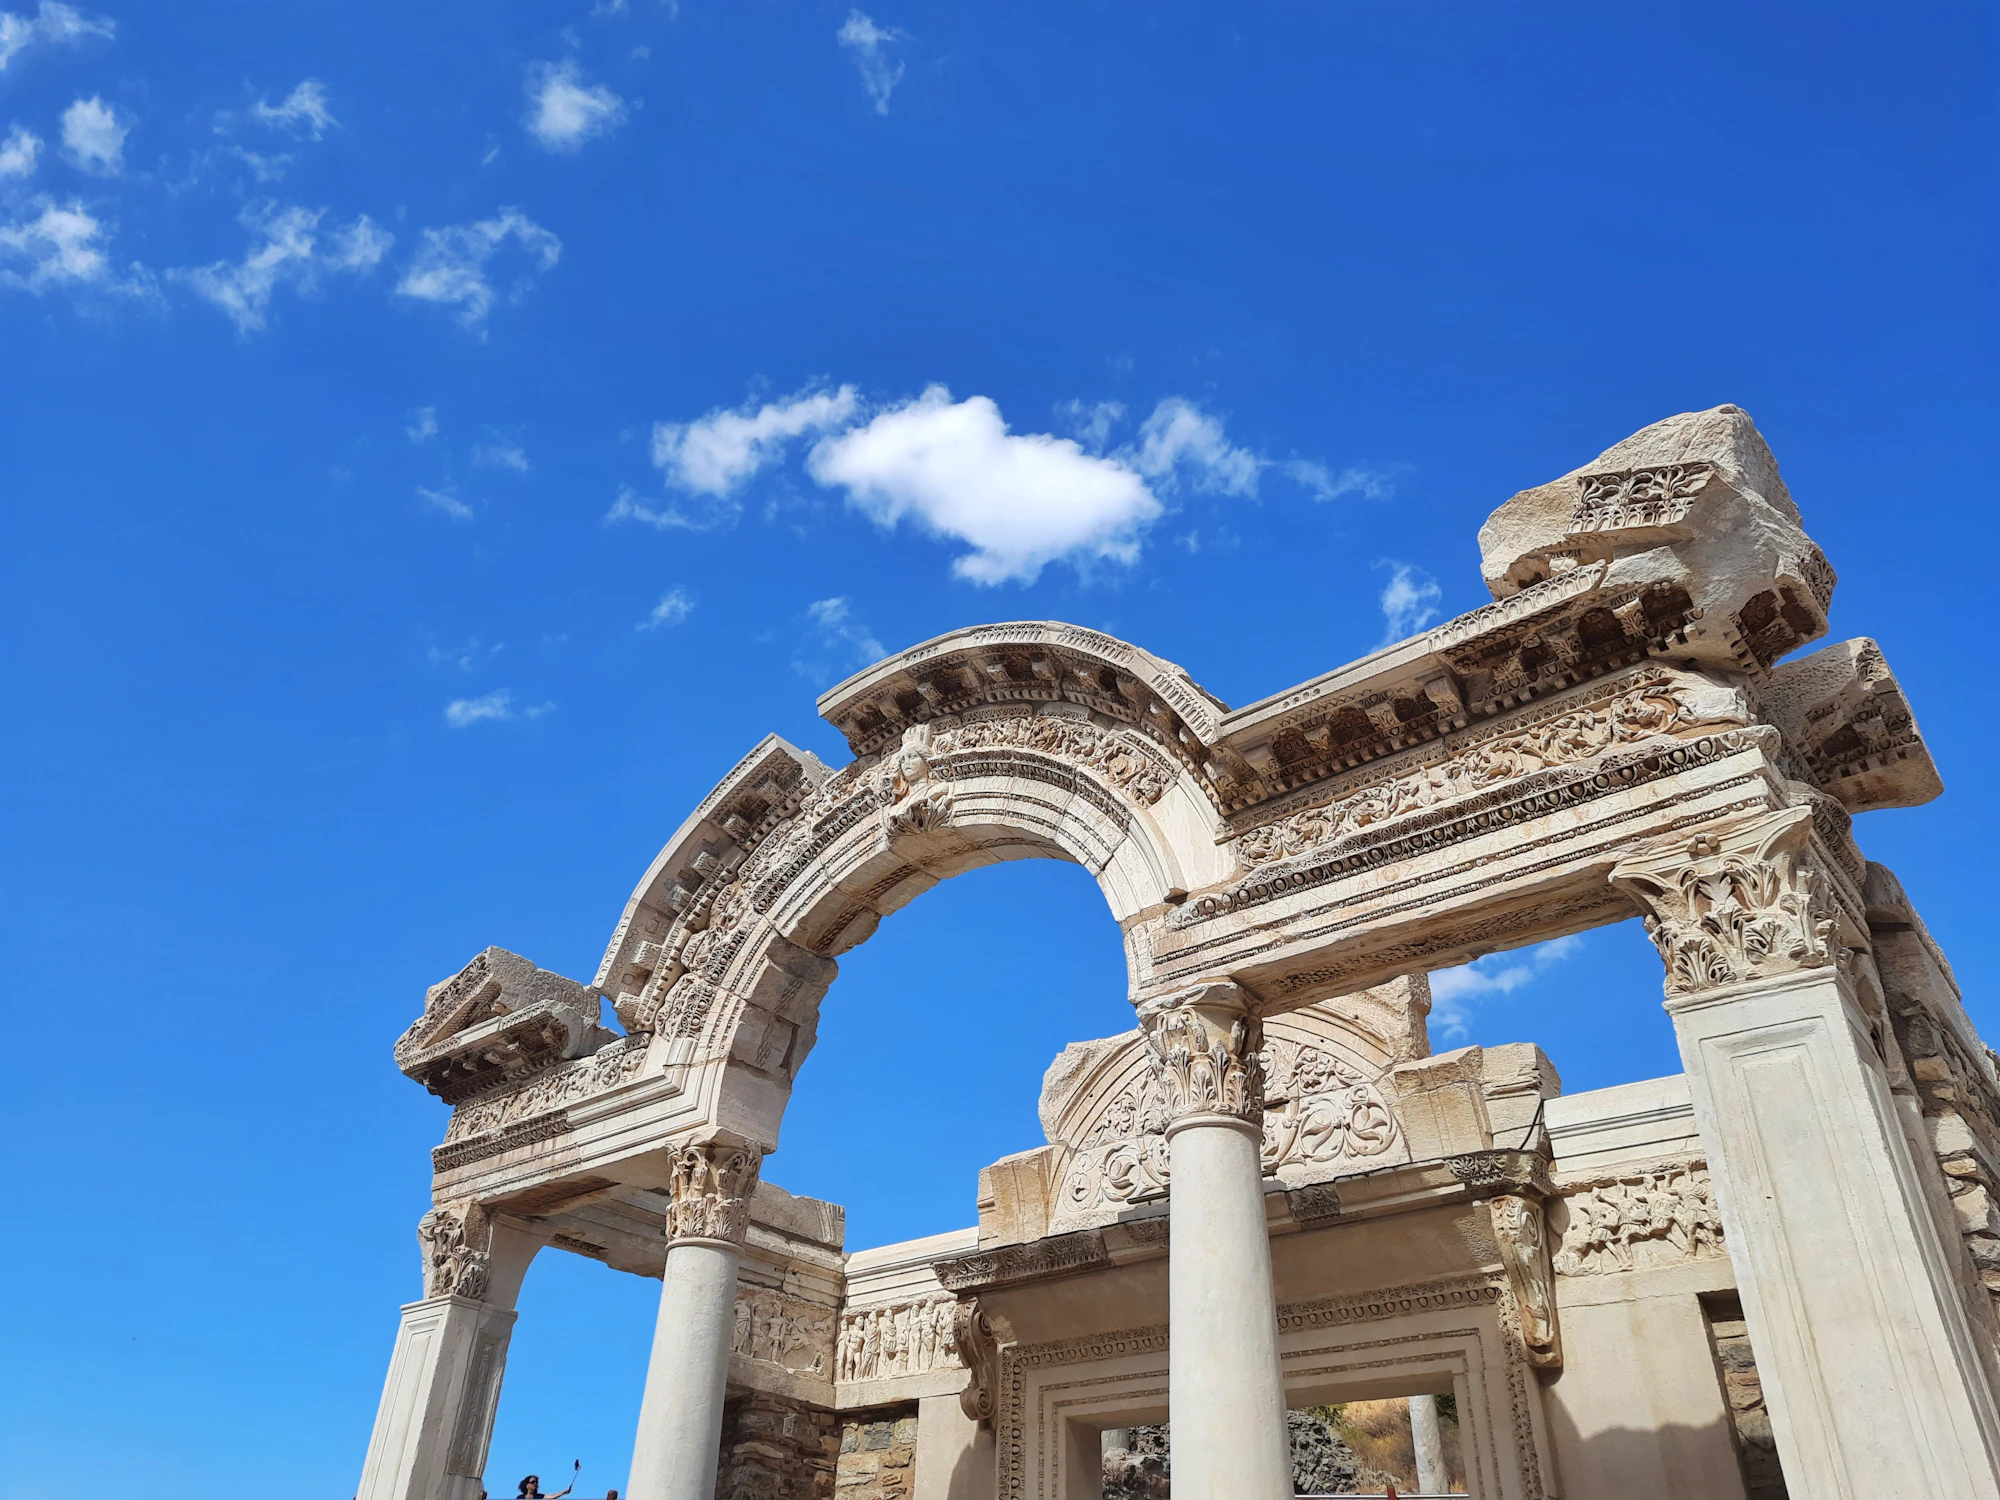 Ephesus Izmir: Top 10 Things to See in the Ancient City